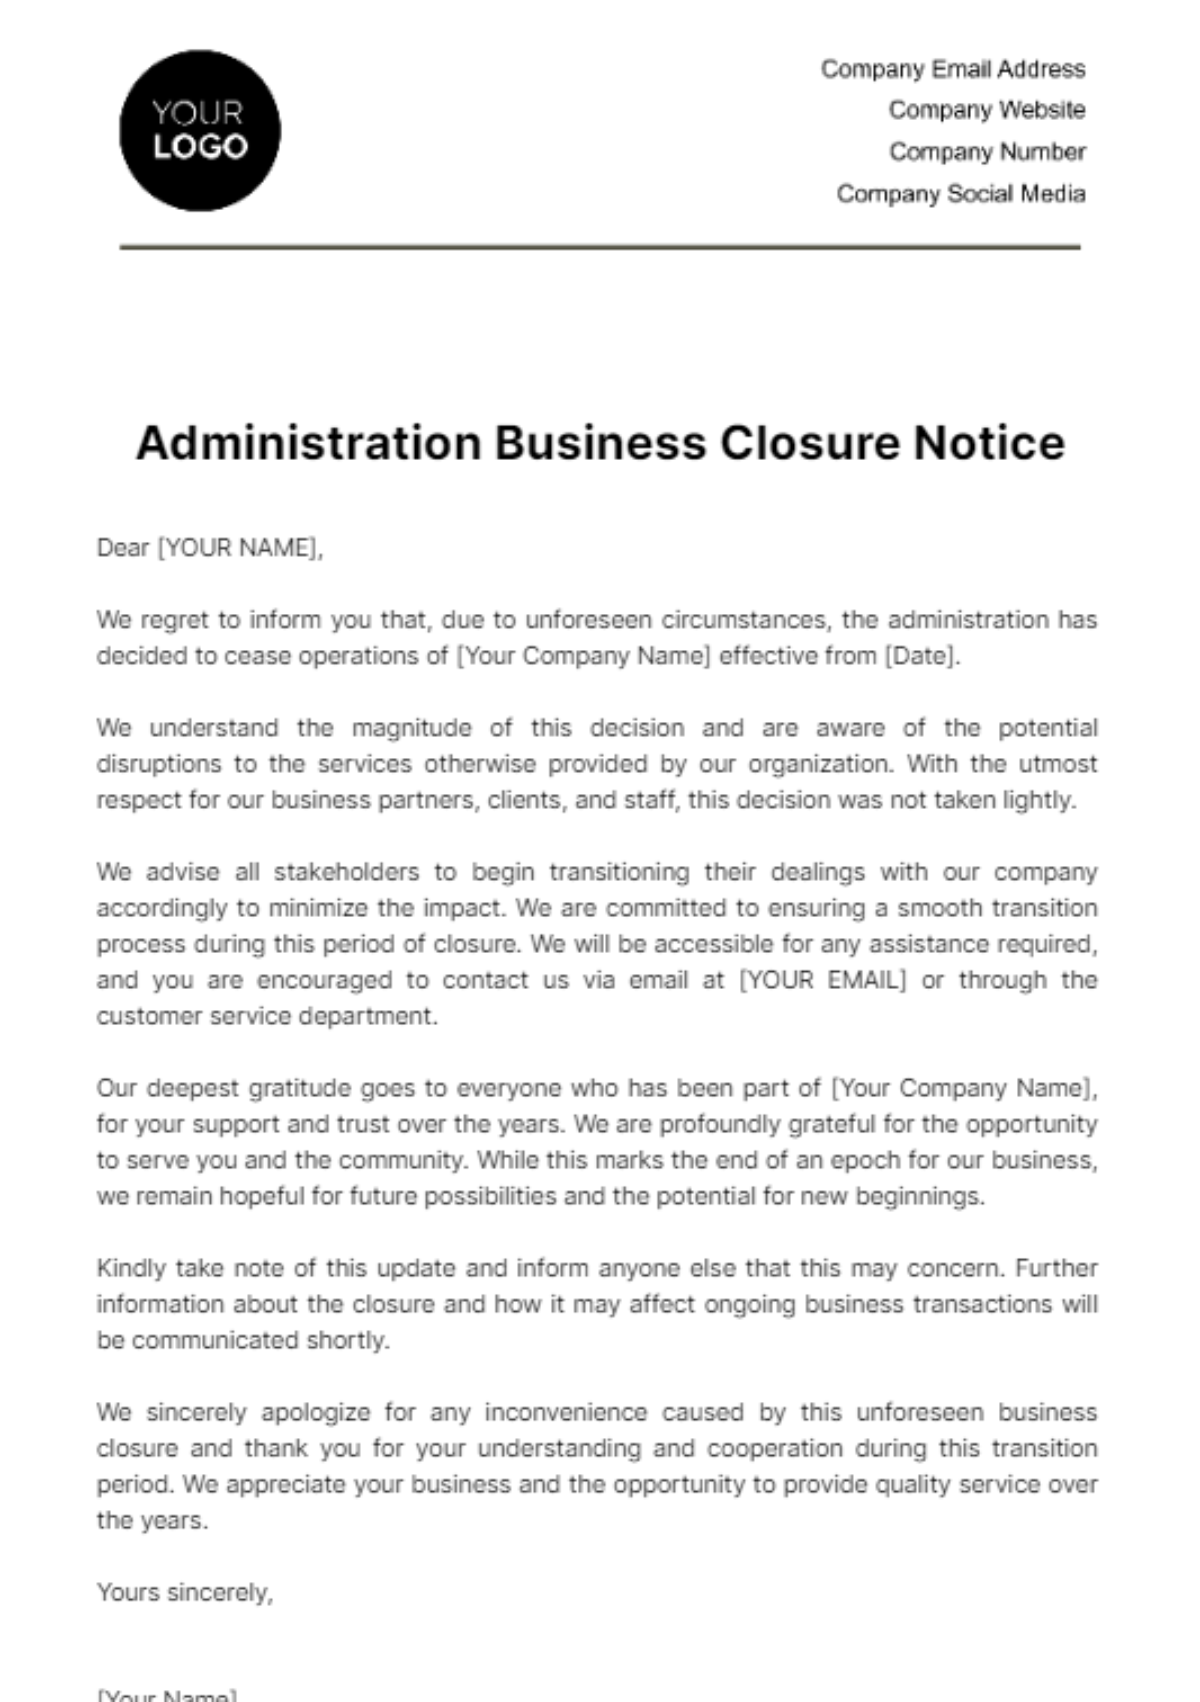 Administration Business Closure Notice Template